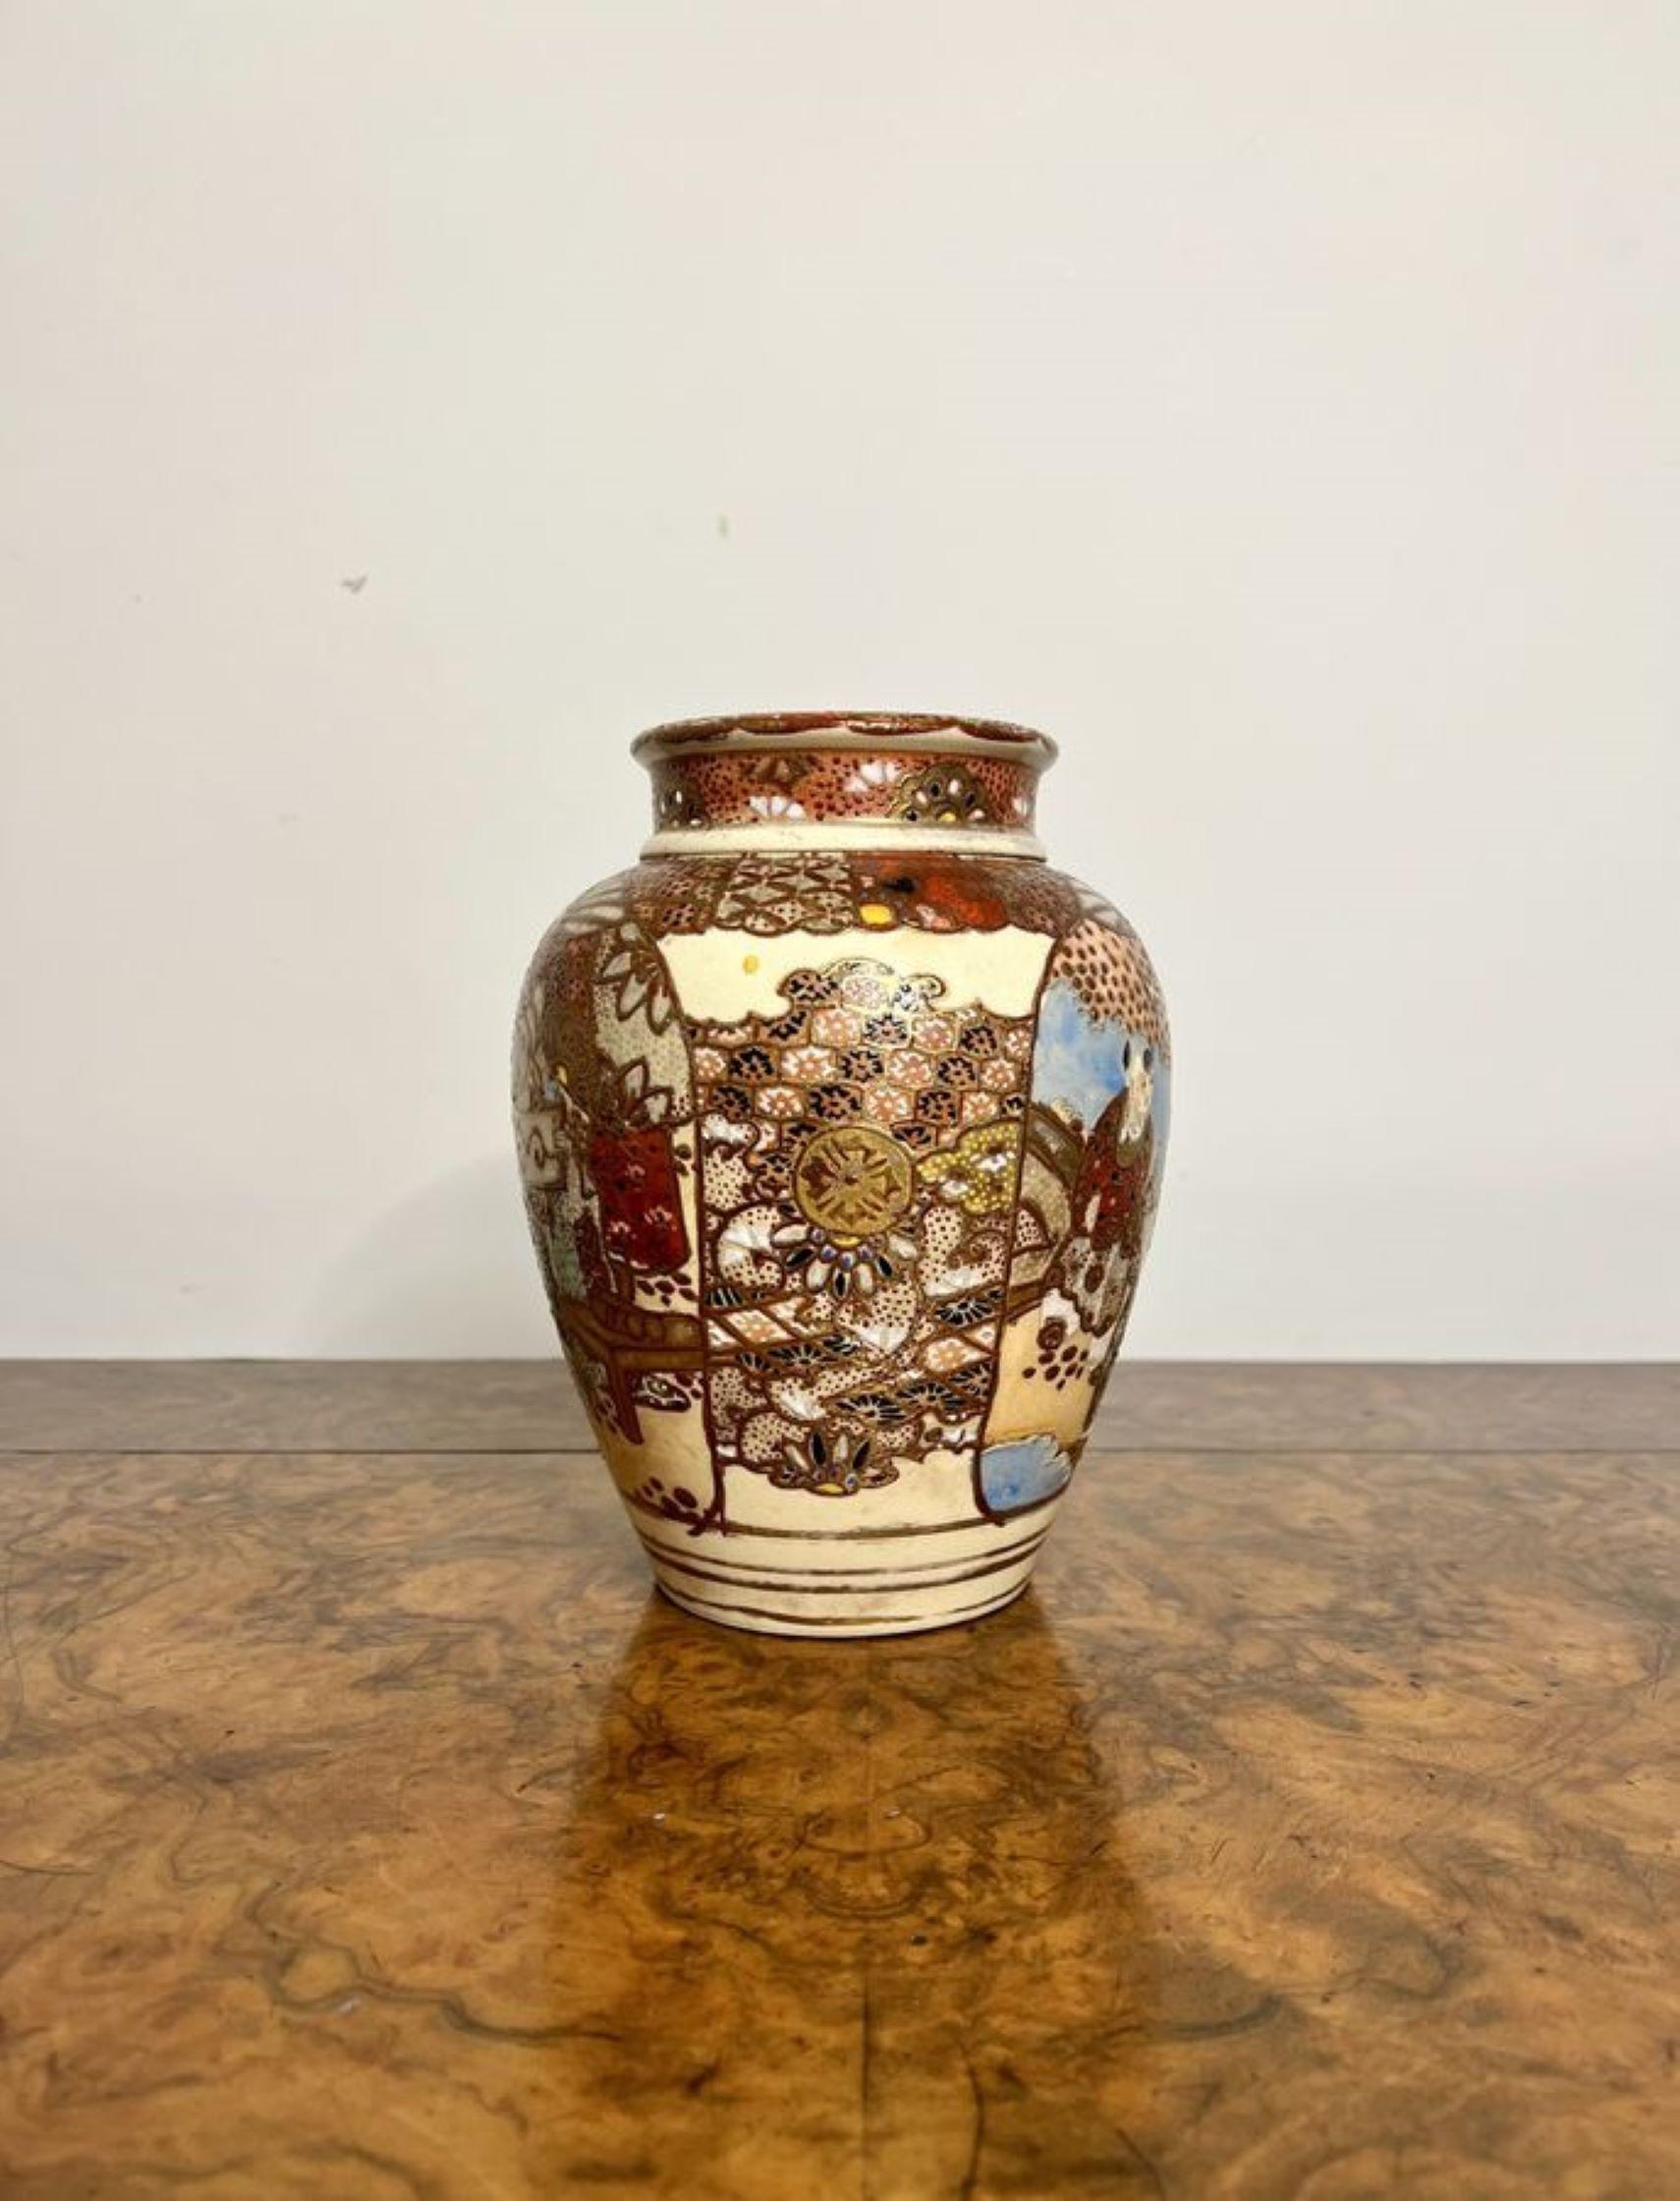 Quality antique Japanese Satsuma ginger jar and cover having a quality antique Japanese ginger jar and cover with wonderful hand painted decoration in gold, red, blue, brown and black colours. 

D. 1910